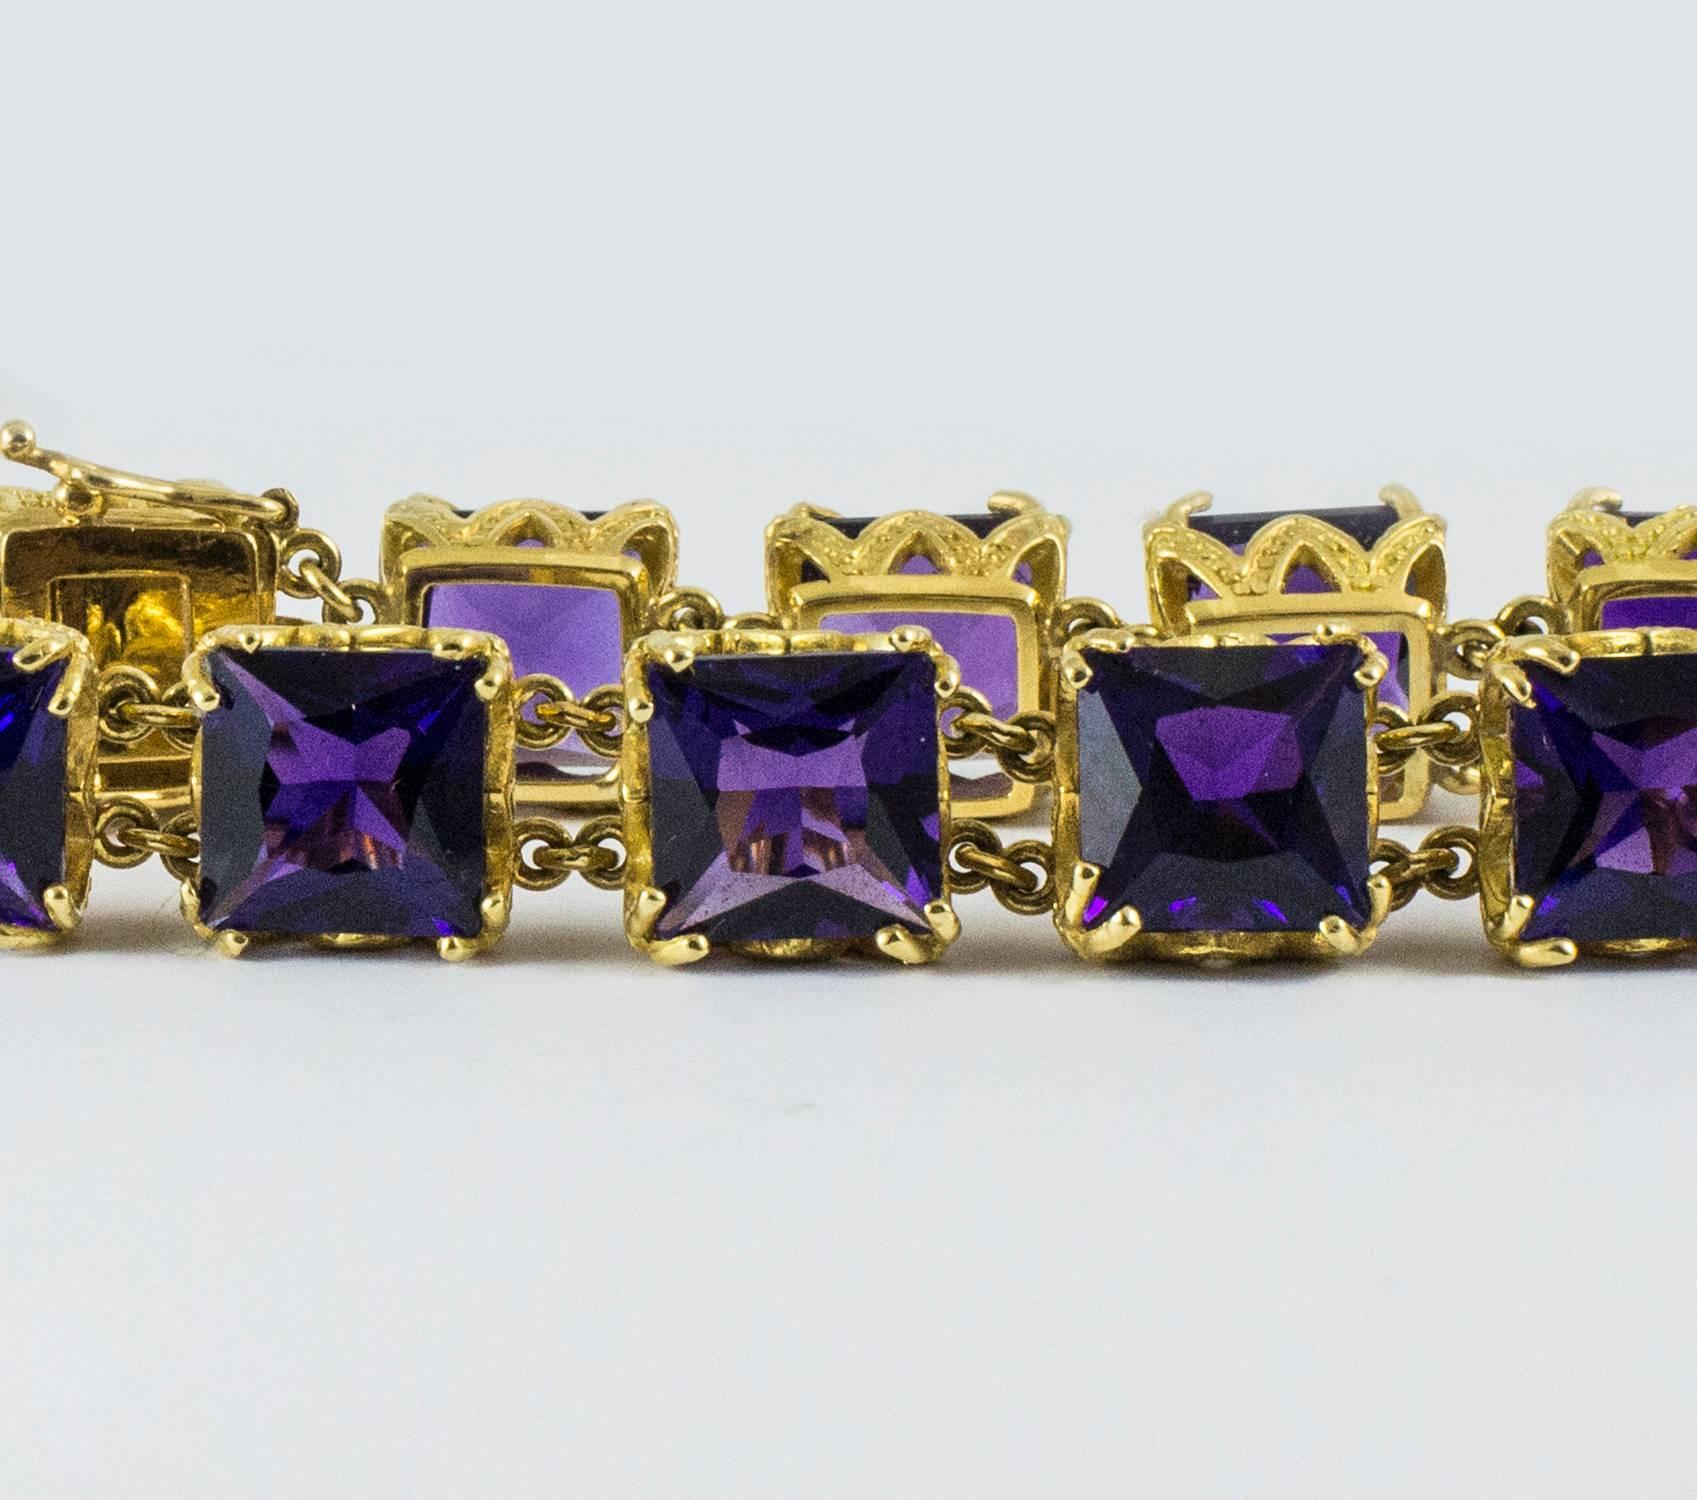 An exceptional amethyst bracelet set in 18k custom made gold box mount. The bracelet holds 12 square mixed cut amethysts totaling 52.5 ct. tw. The amethysts are a deep strong and transparent purple. This colour is typical of the highest quality